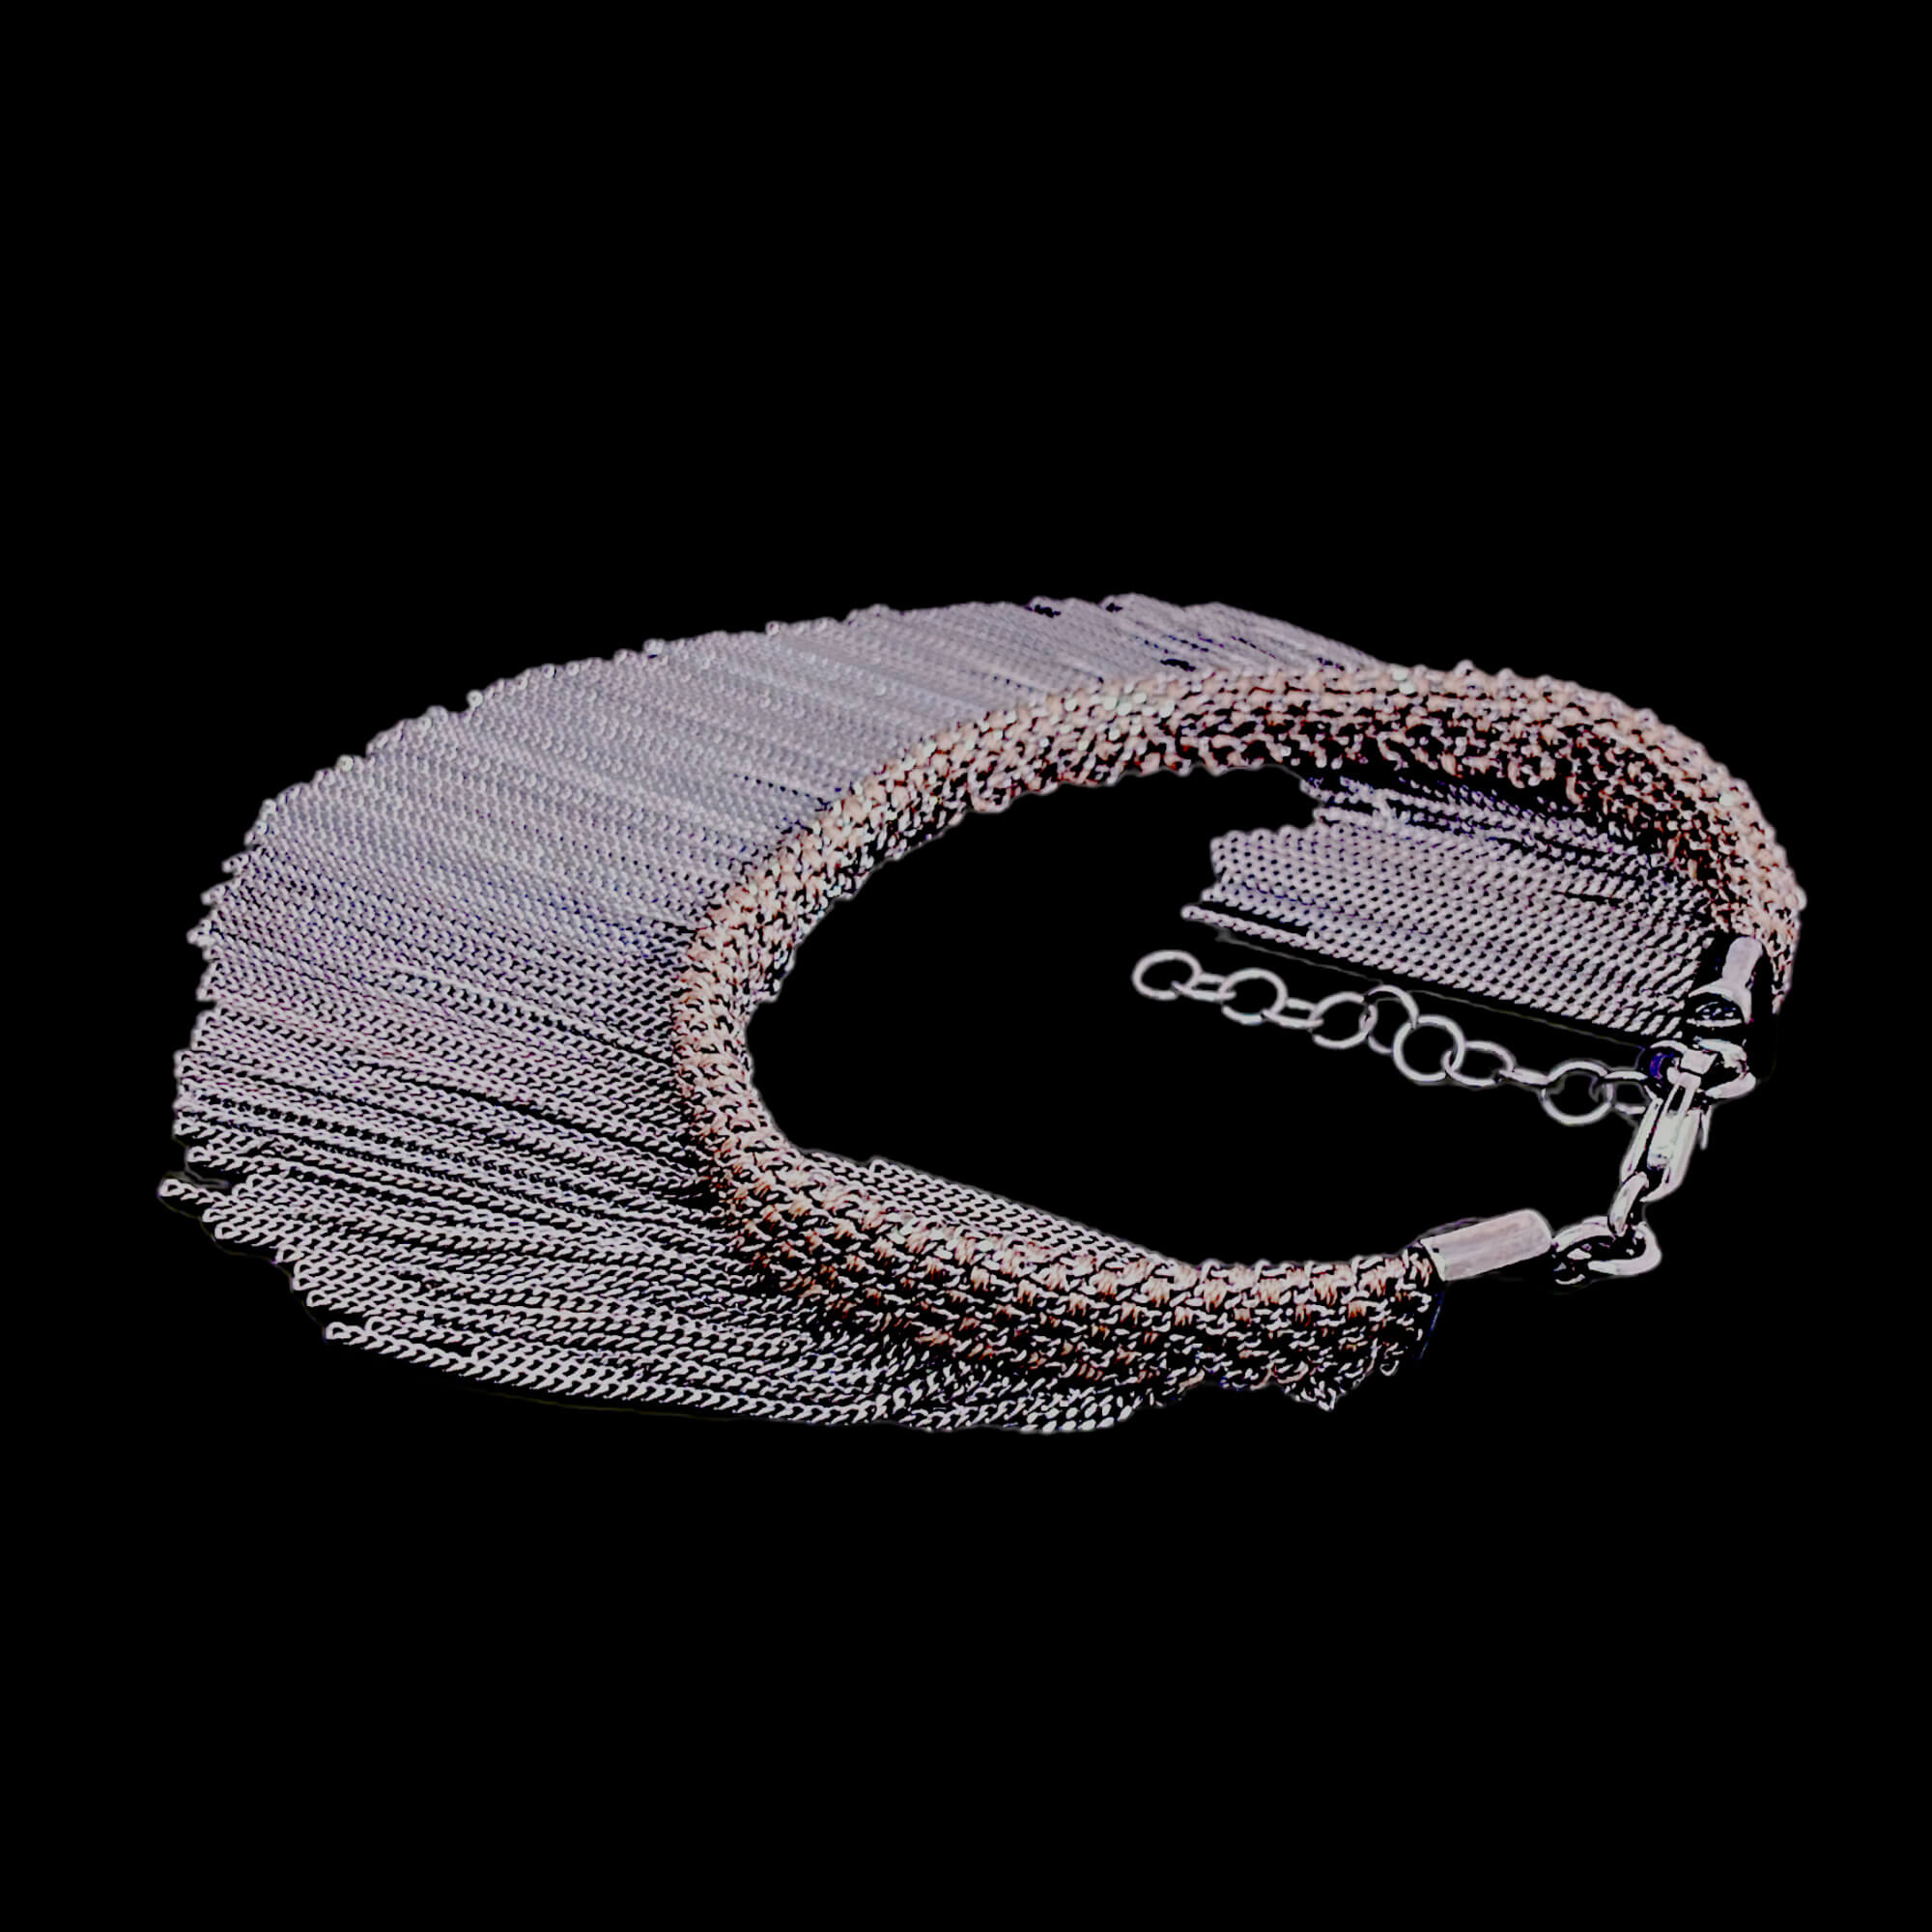 Brown and gray-colored bracelet with hanging chains